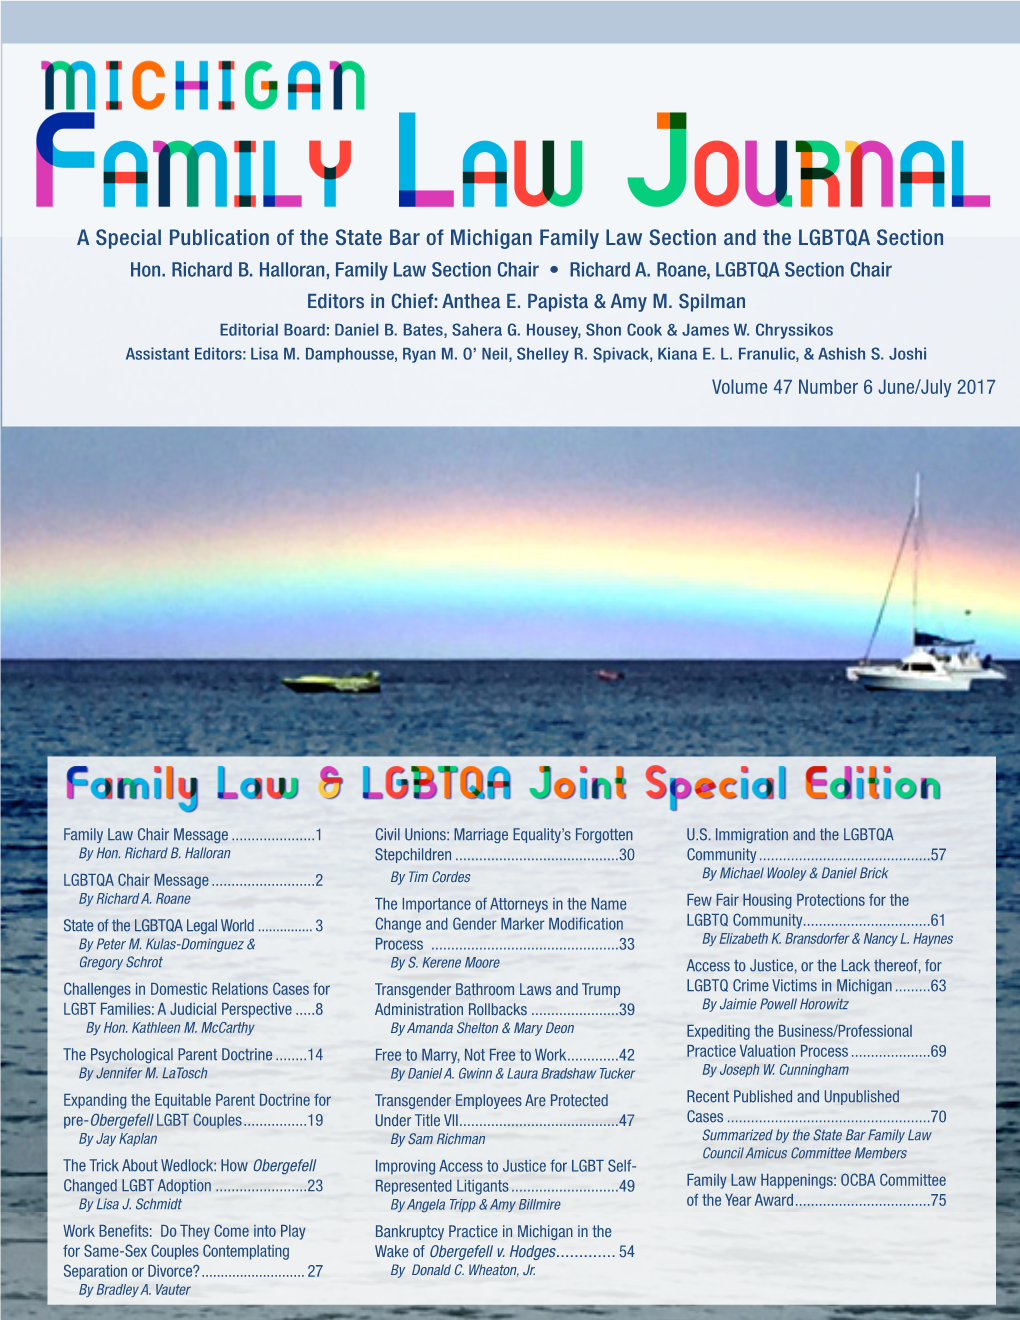 Michigan Family Law Journal Attend a Meeting, Kindly Send an E-Mail in Advance So We Reaches: Are Sure to Have Plenty of Space and Food